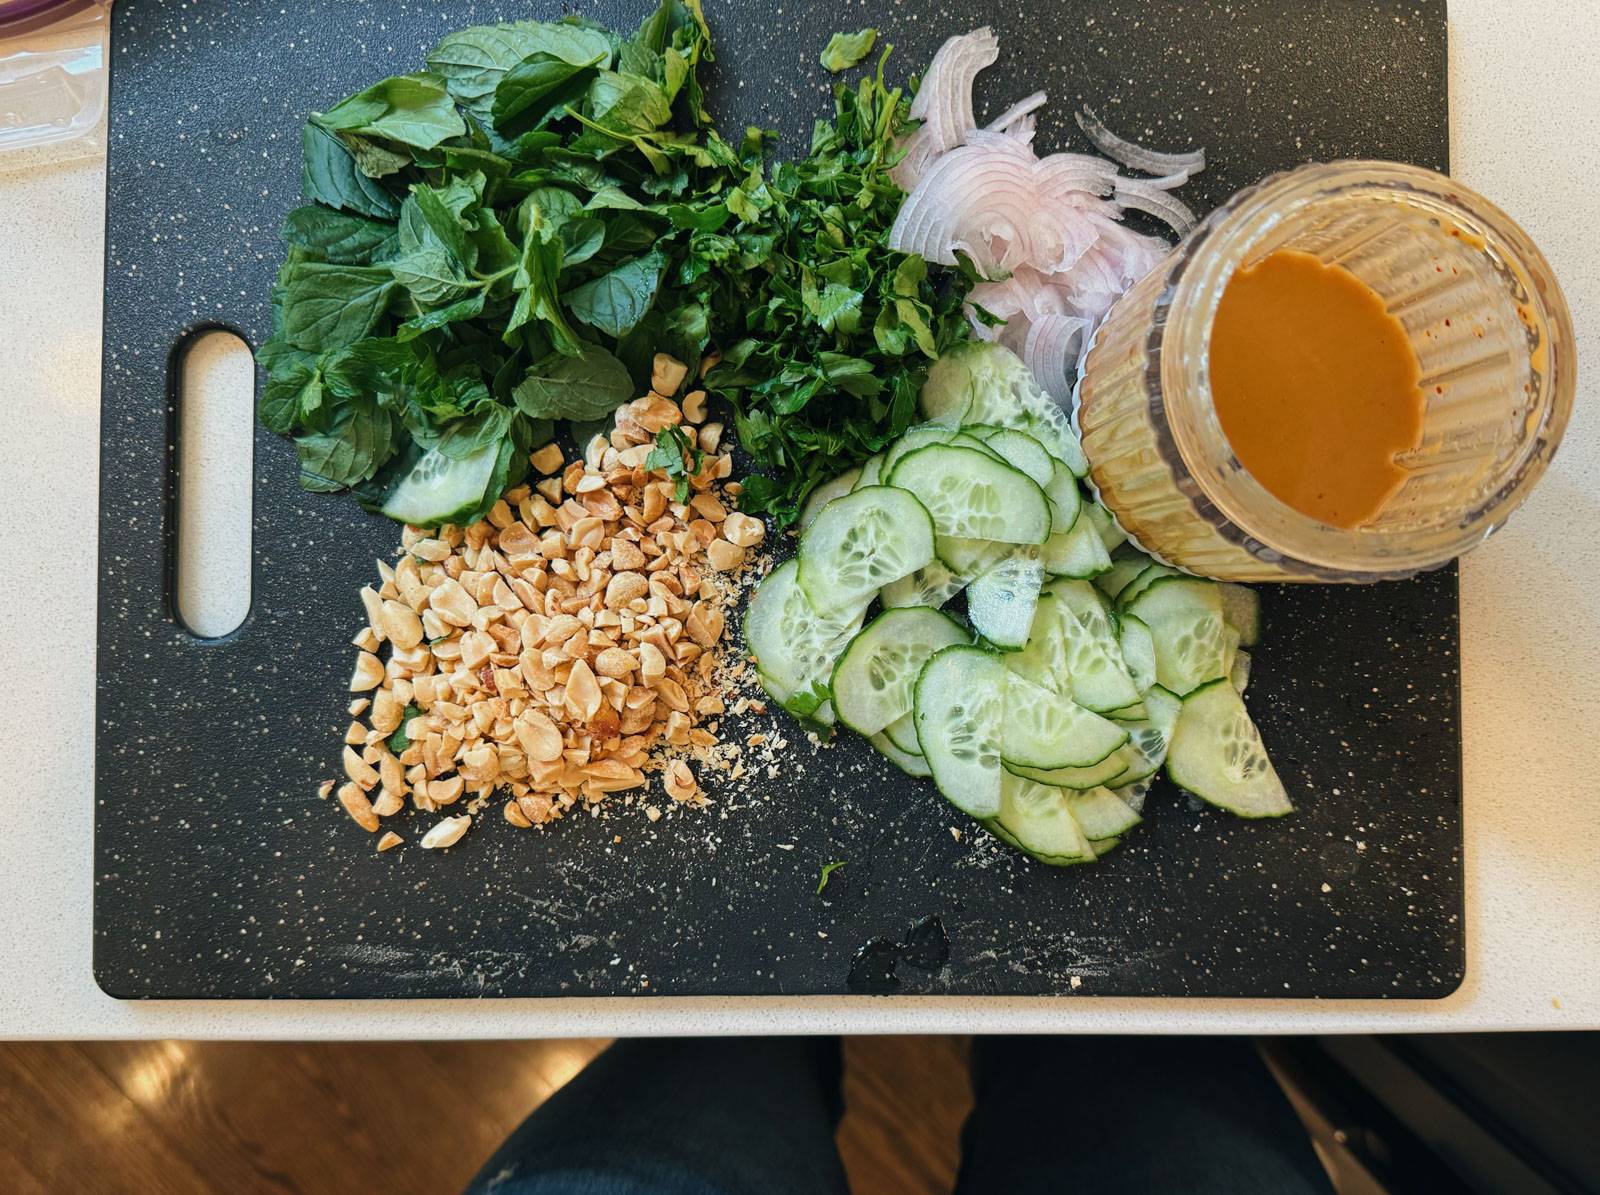 Chopped herbs, peanuts, shallots, and cucumber on a cutting board with a jar of dressing.